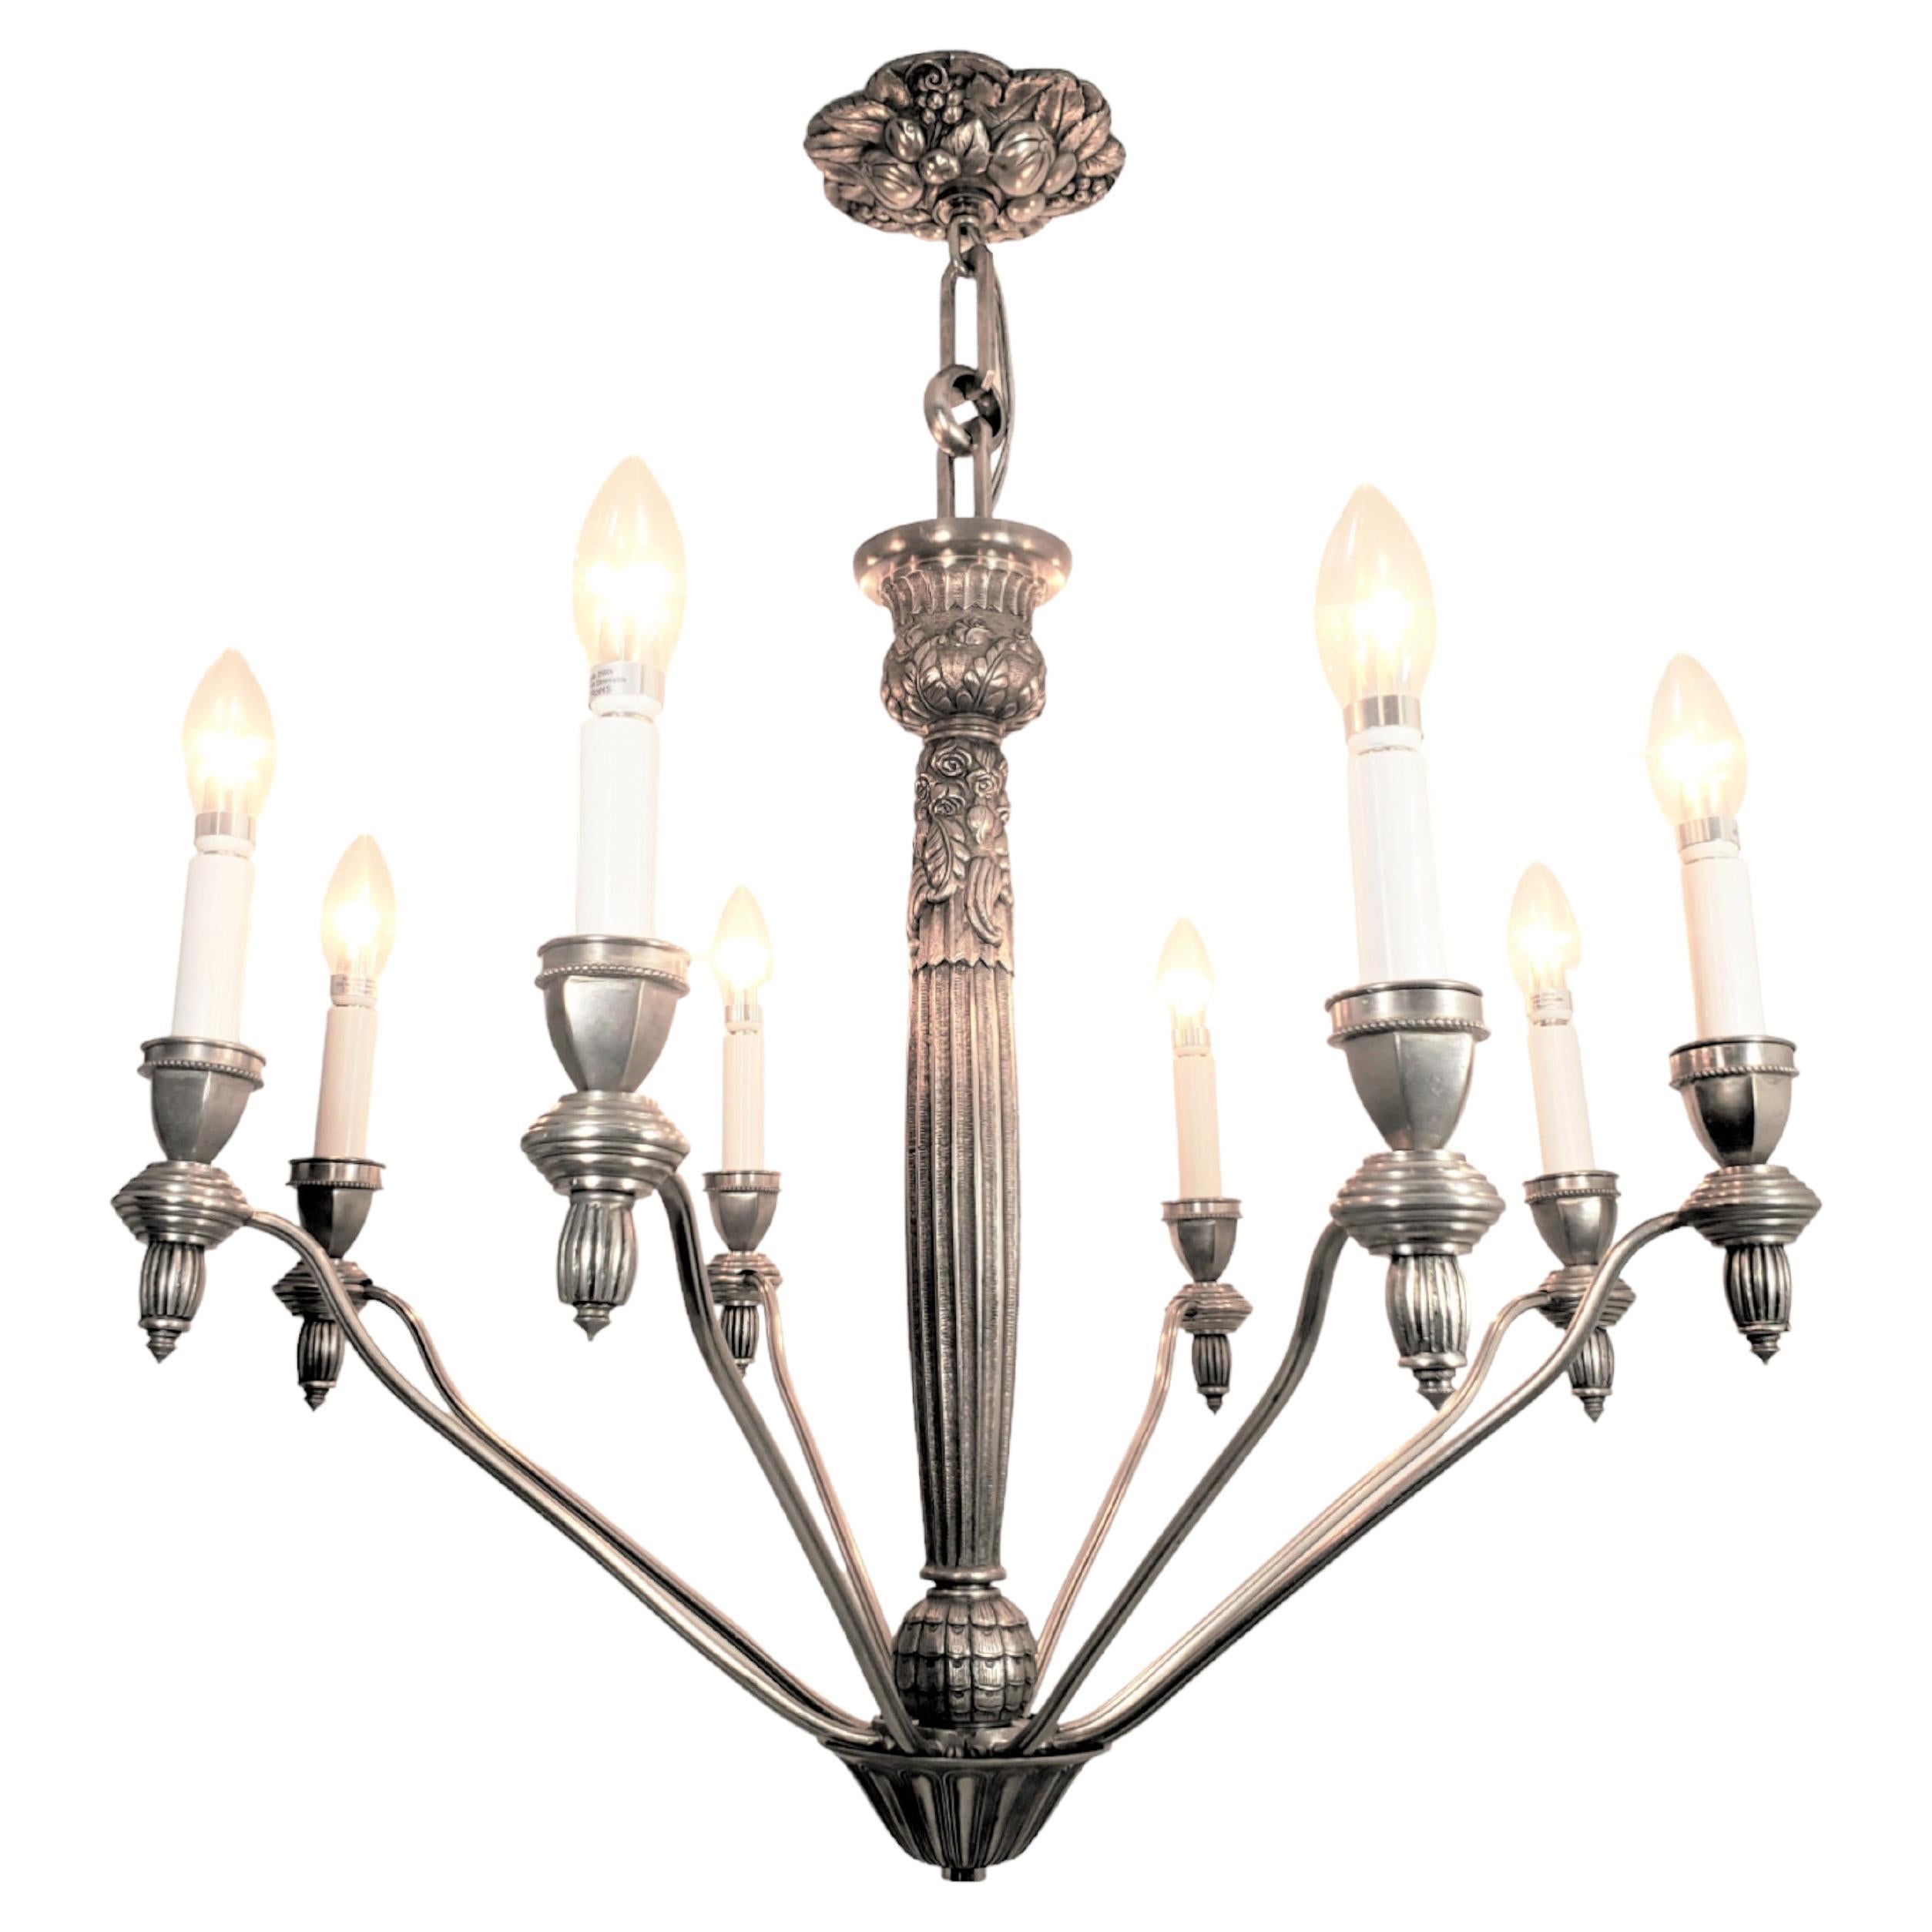 Fine and exquisite original French chandelier boasts eight beautifully cast, heavy nickeled bronze arms, each suspended gracefully by a central reeded stem. Every arm is adorned with angular bobeches, showcasing a delicate beaded edge just beneath